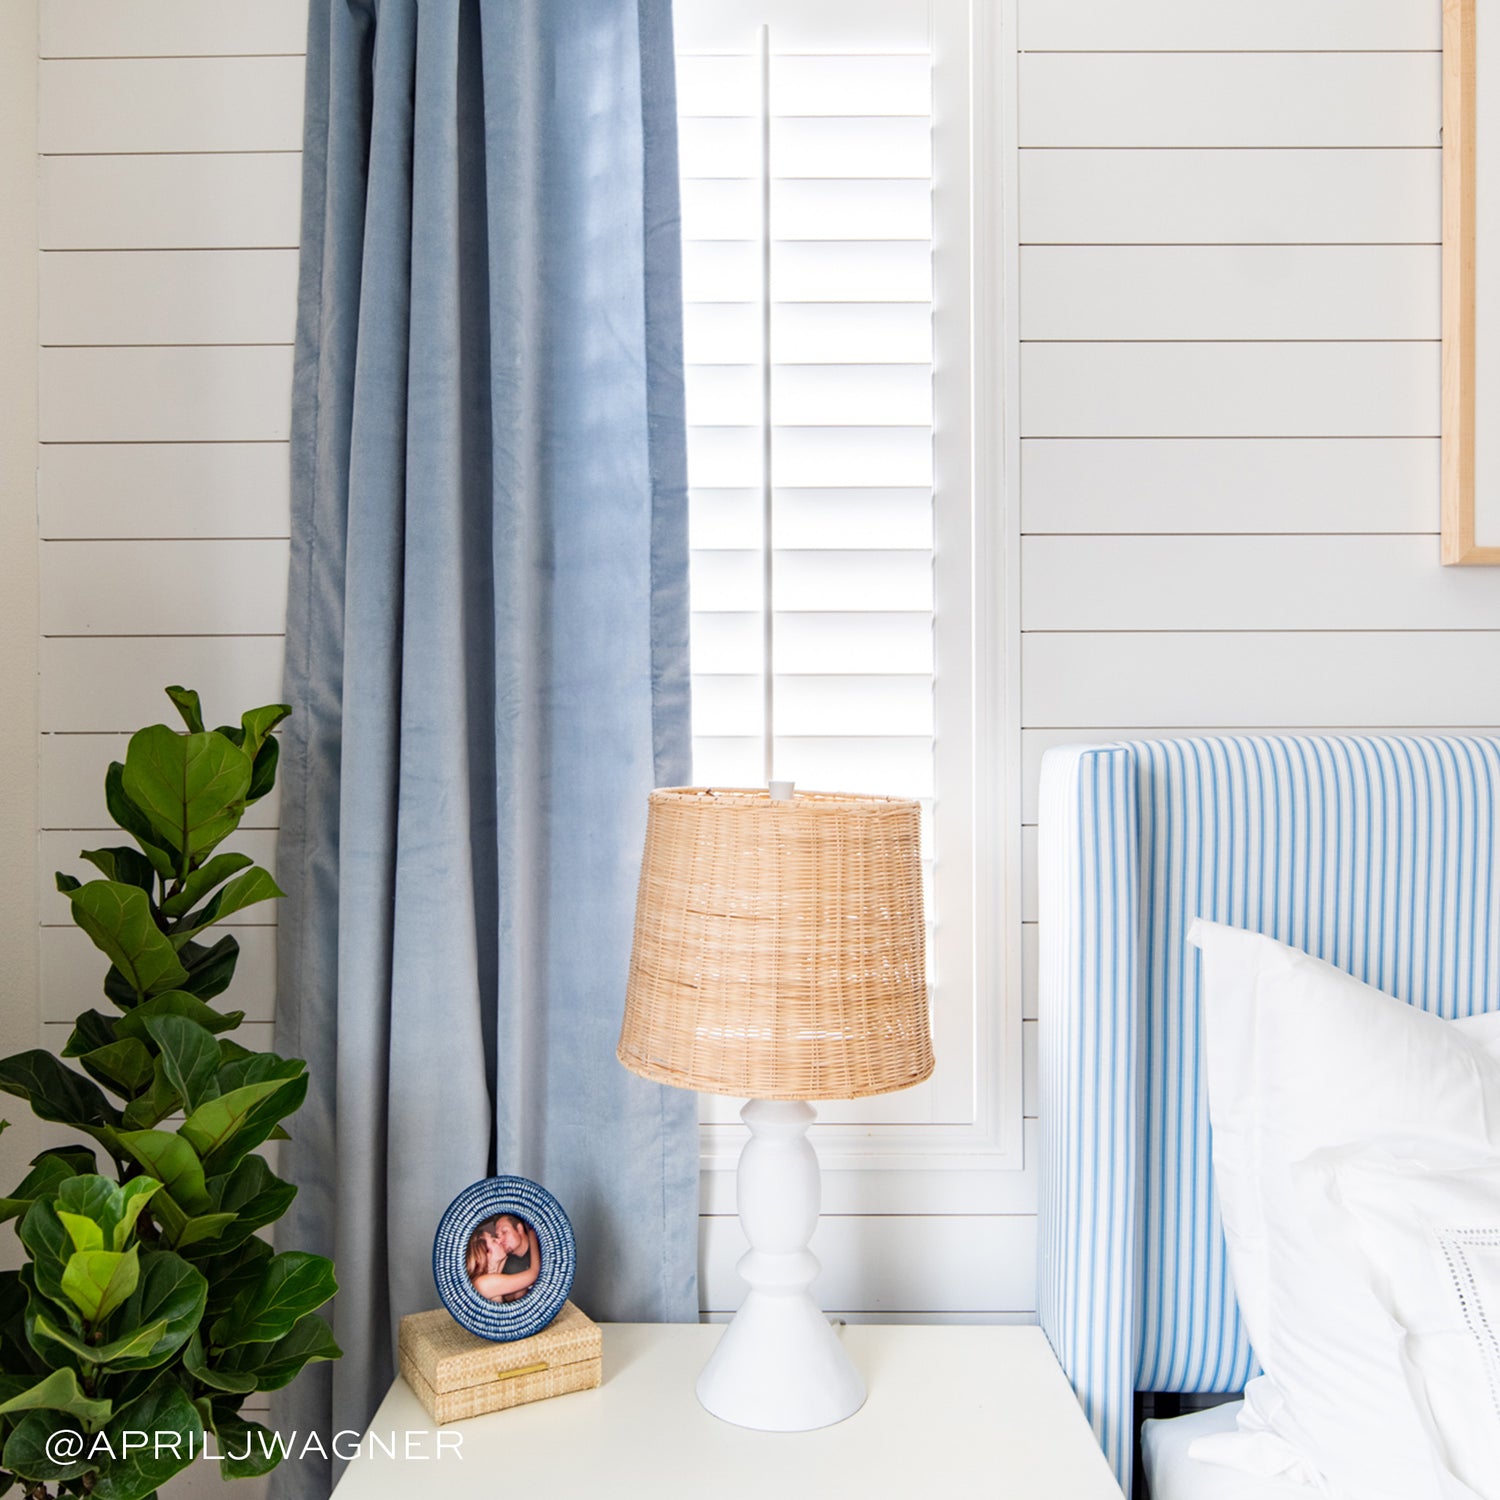 sky blue curtains for bedroom